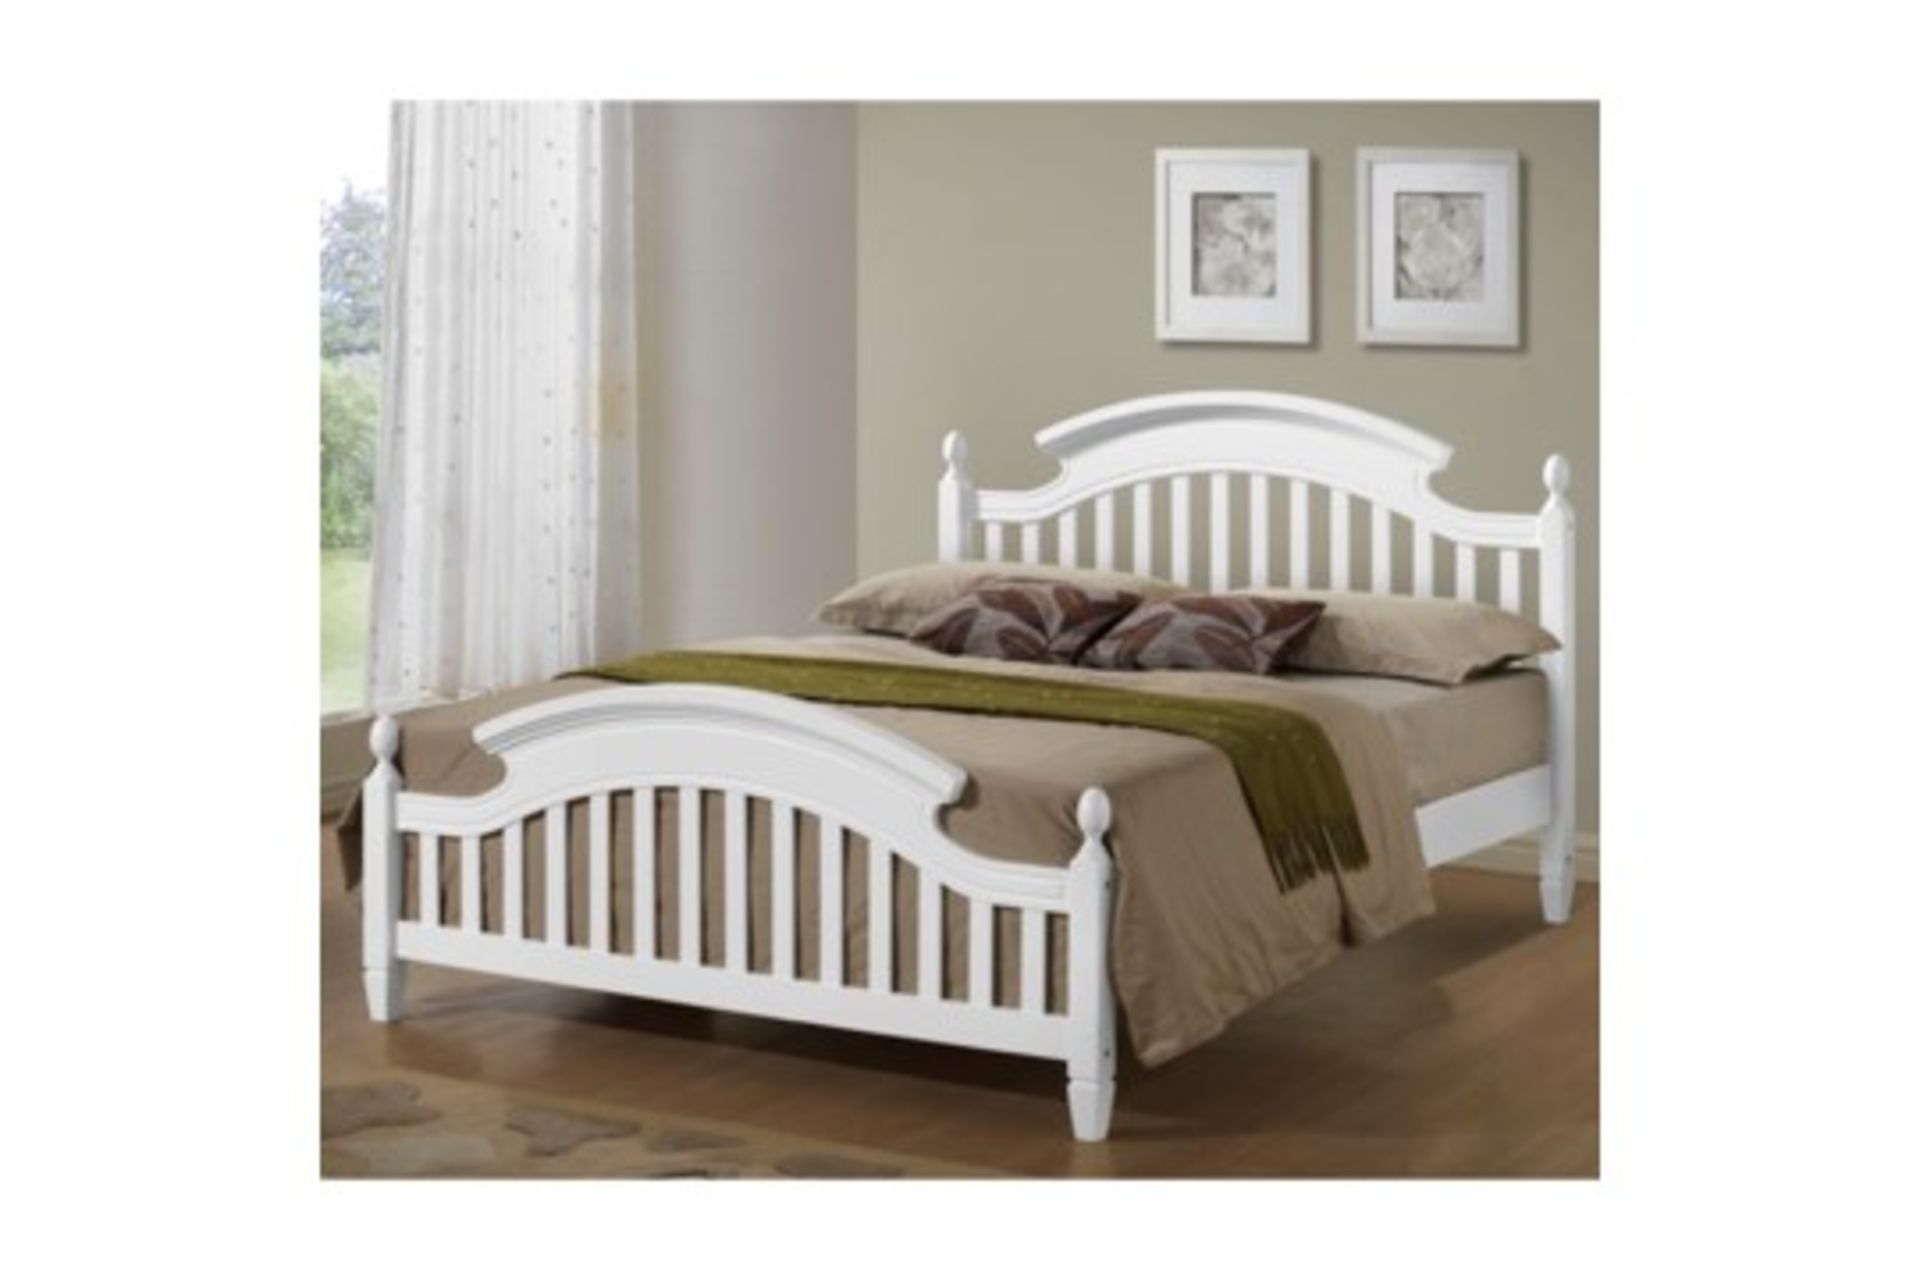 Boxed Isabel Single Bed RRP £300. IMAGES ARE FOR ILLUSTRATION PURPOSES ONLY AND MAY NOT BE AN